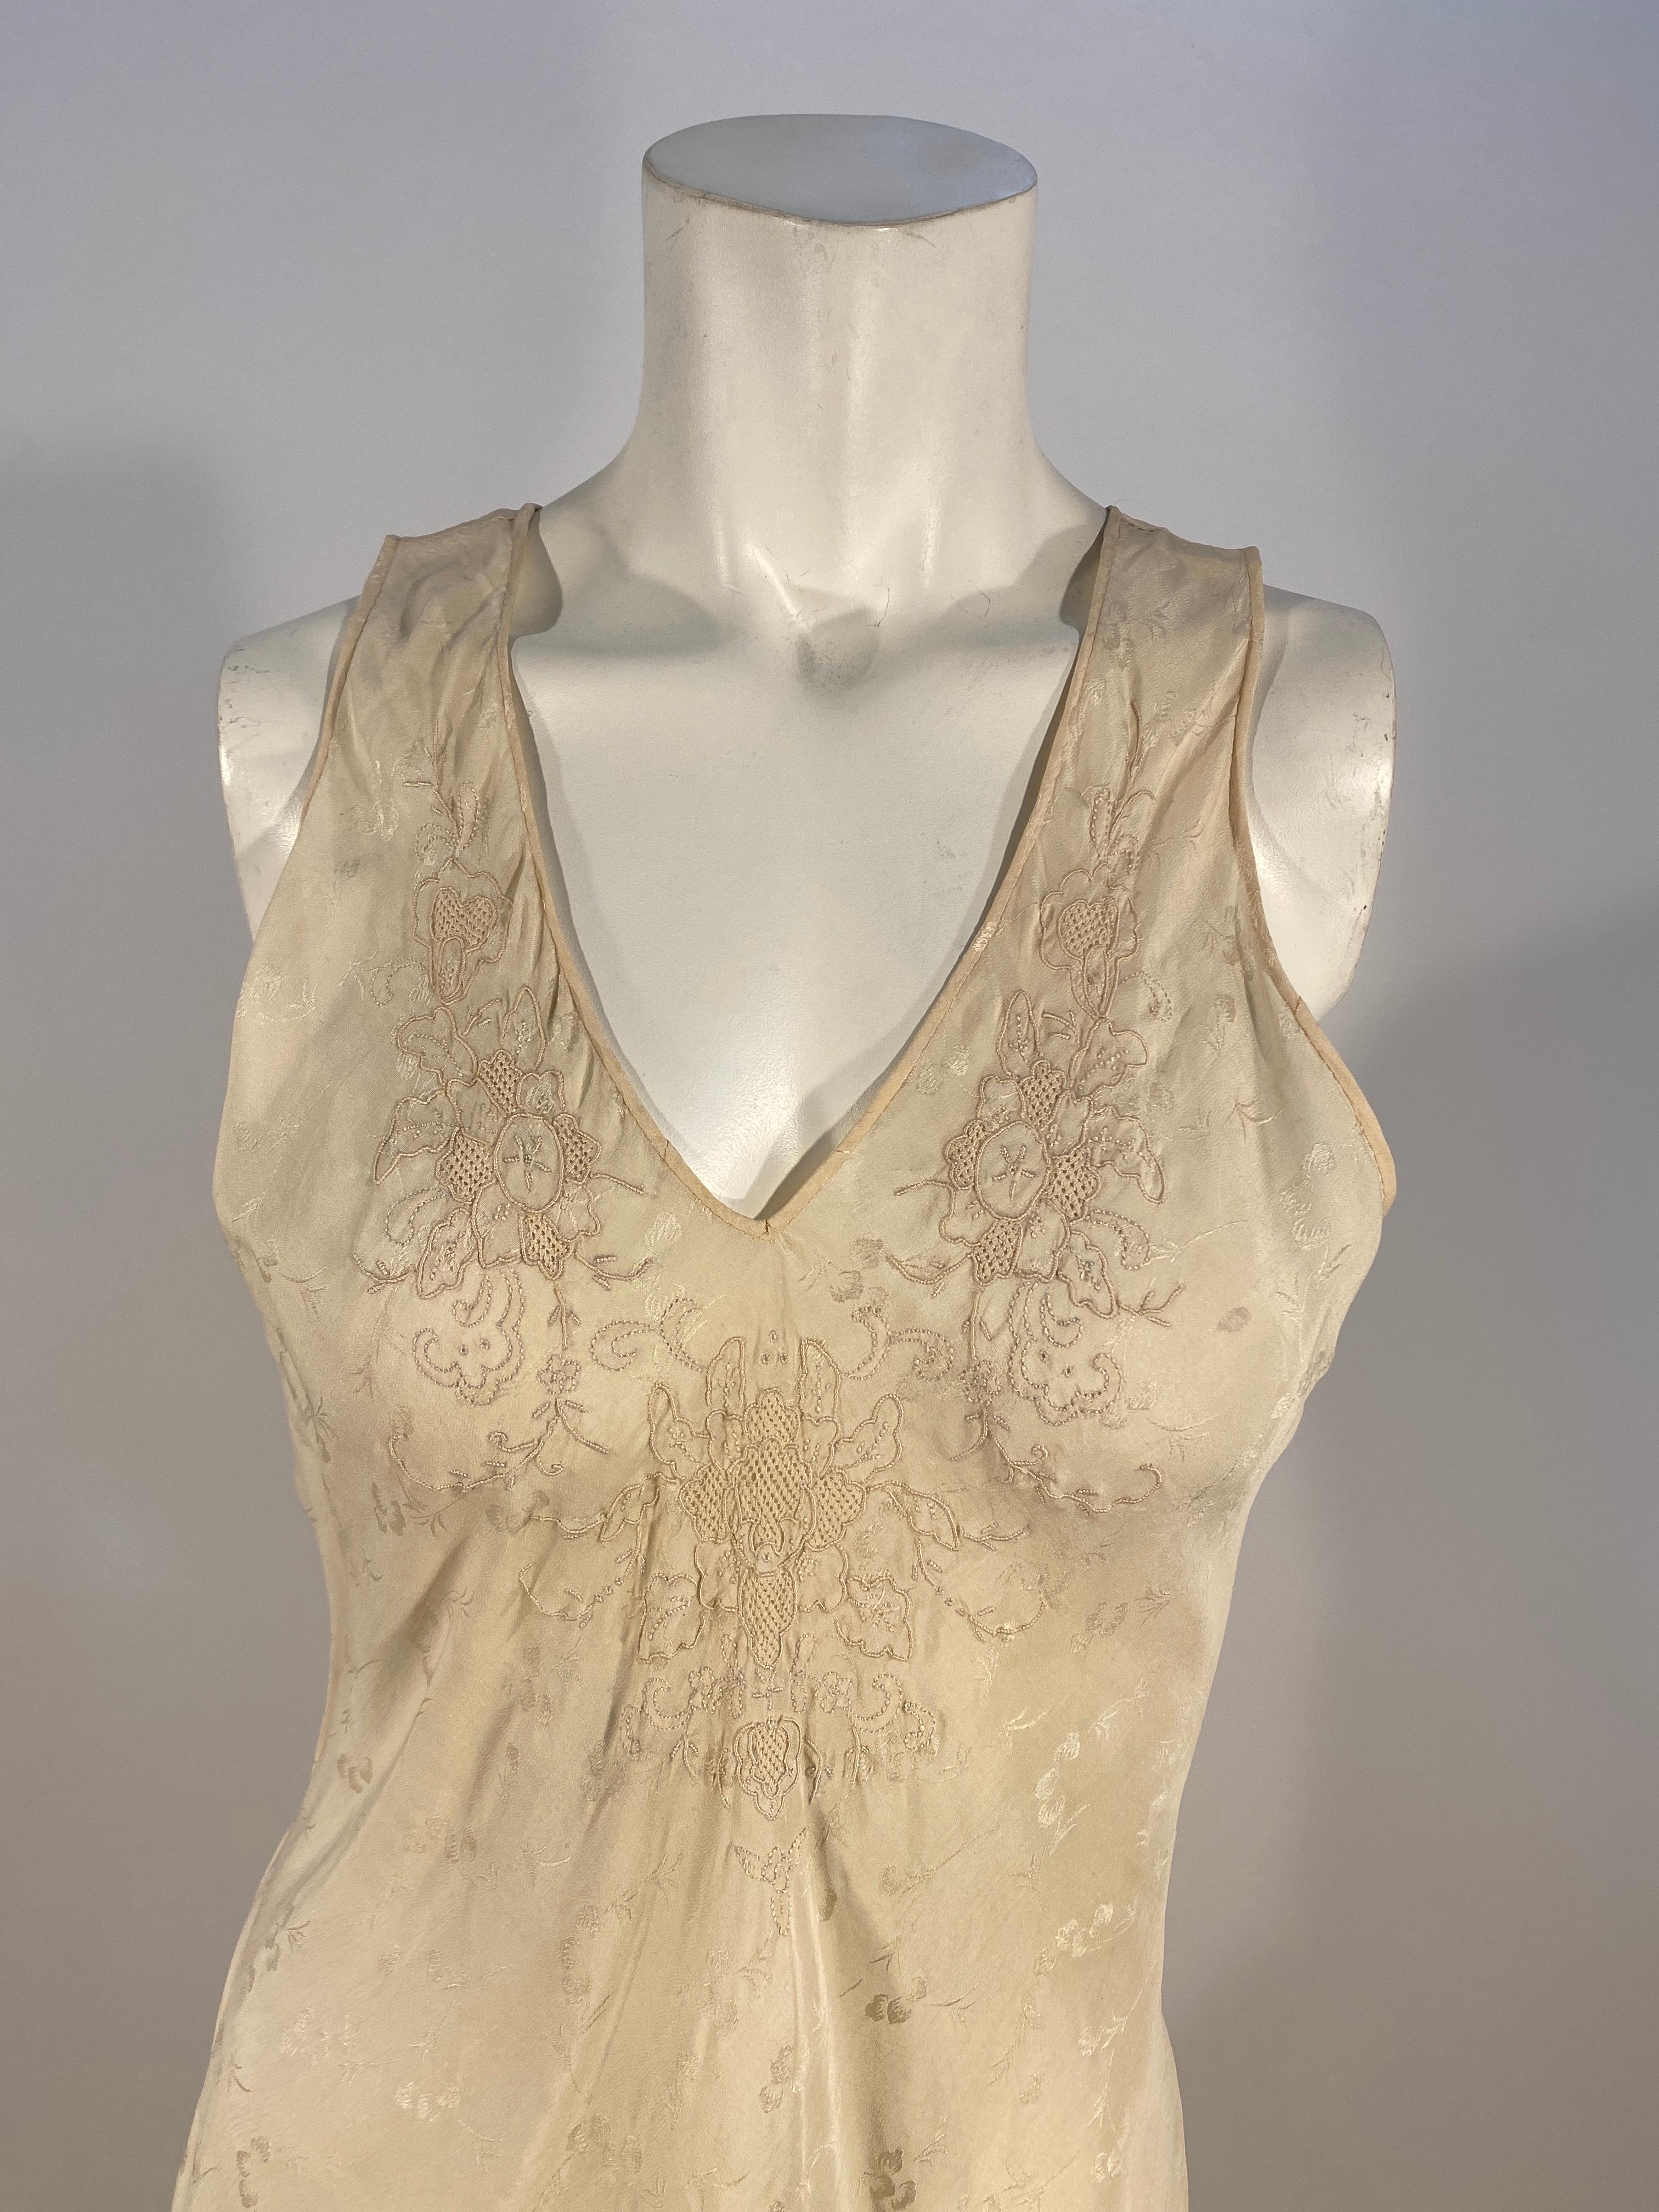 1930s Ivory (with a soft yellow hue) Bias Cut Dress with jacquard textile and hand embroidery with cut and pull work (normally done by nuns as it is very labor intensive).. 